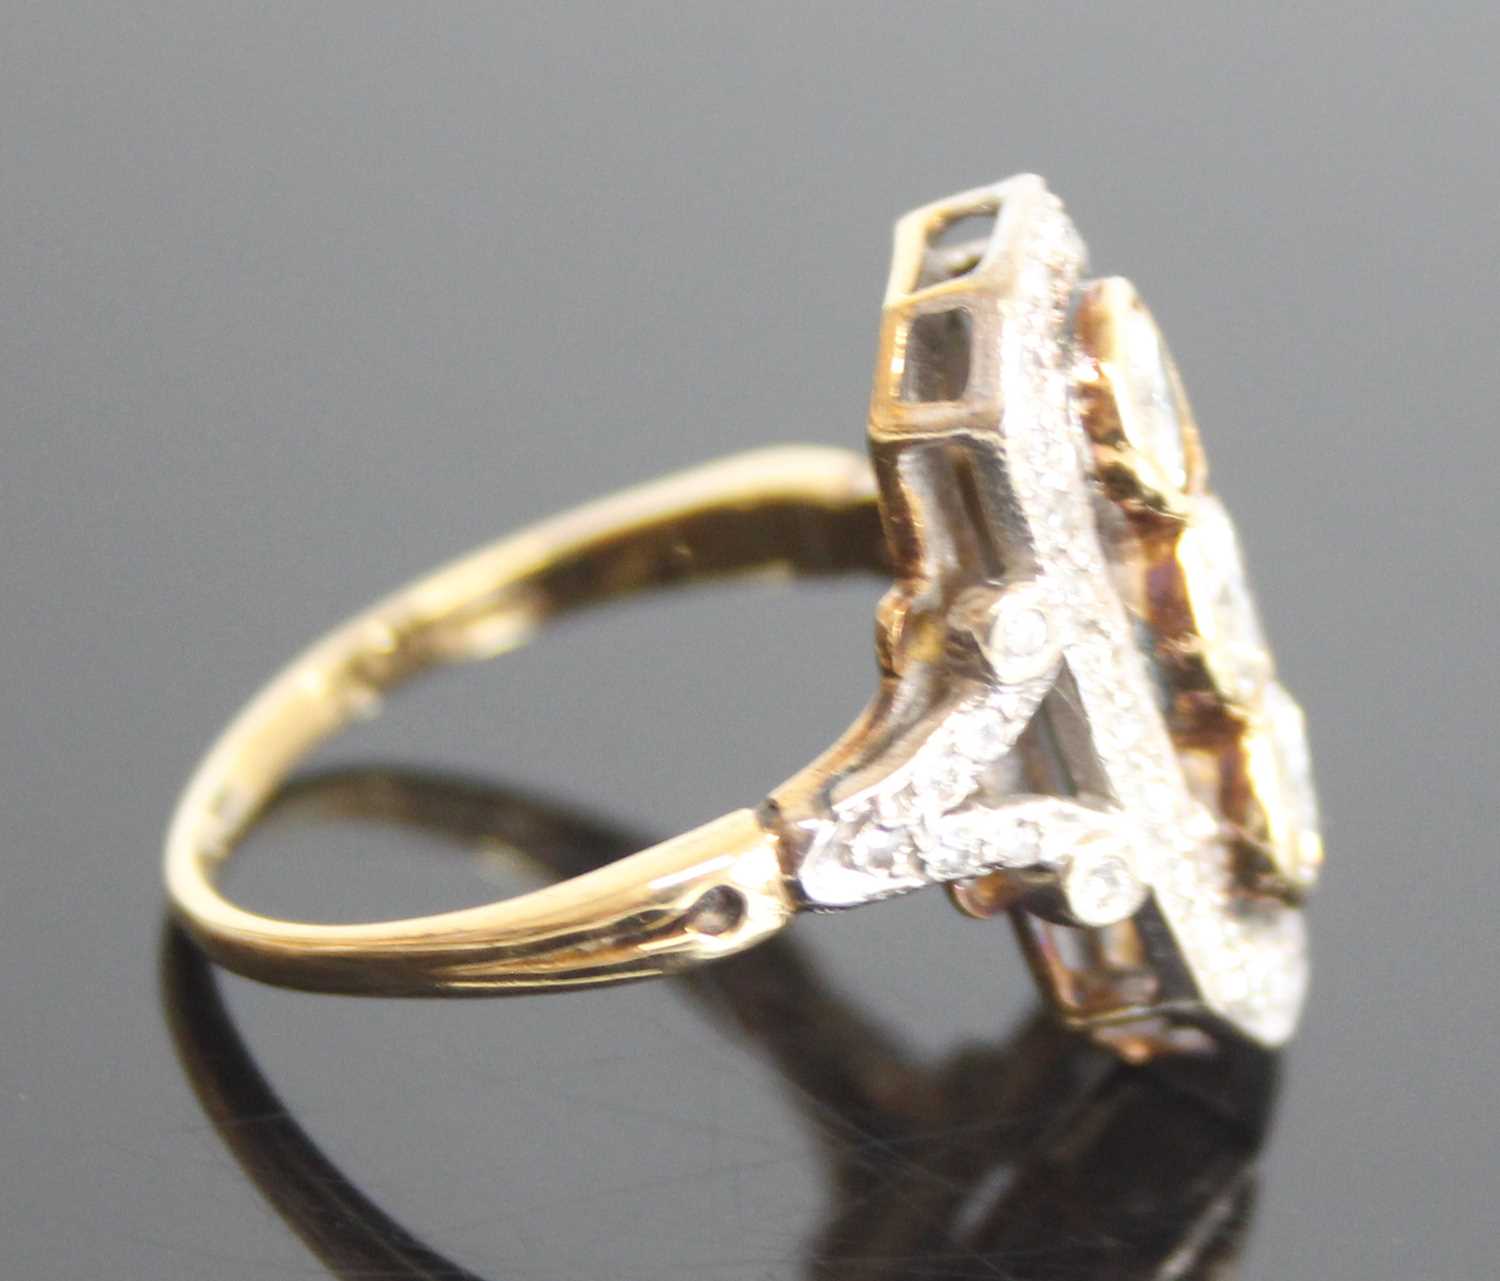 An 18ct yellow and white gold Art Deco style panel ring comprising 3 round brilliant cut diamonds in - Image 3 of 7